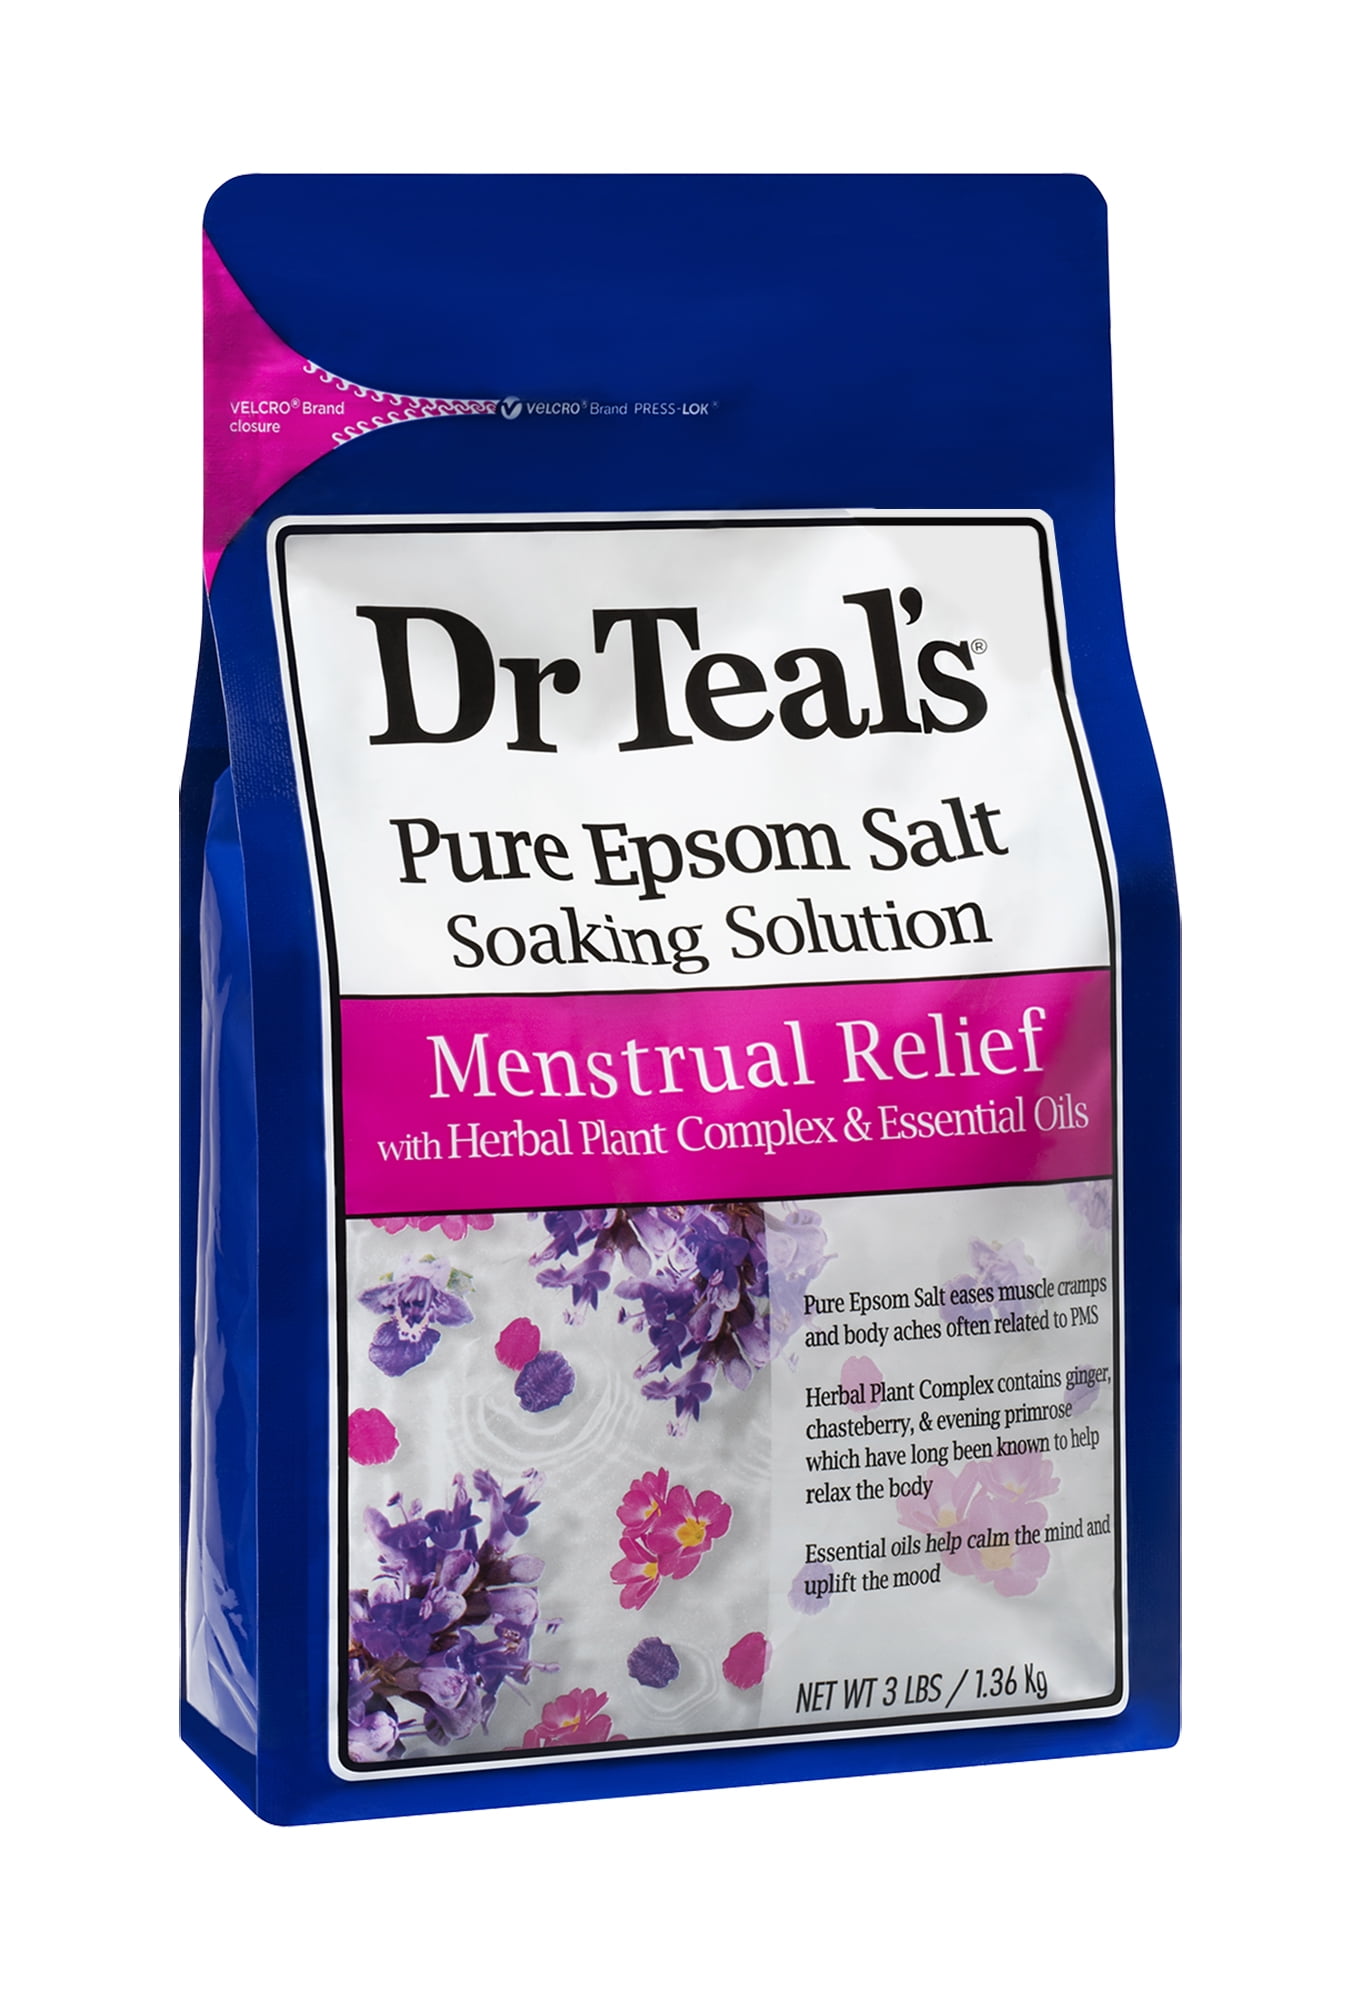 Dr Teal's Menstrual Relief Epsom Salt Soaking Solution with Herbal Plant Complex, 3 lbs